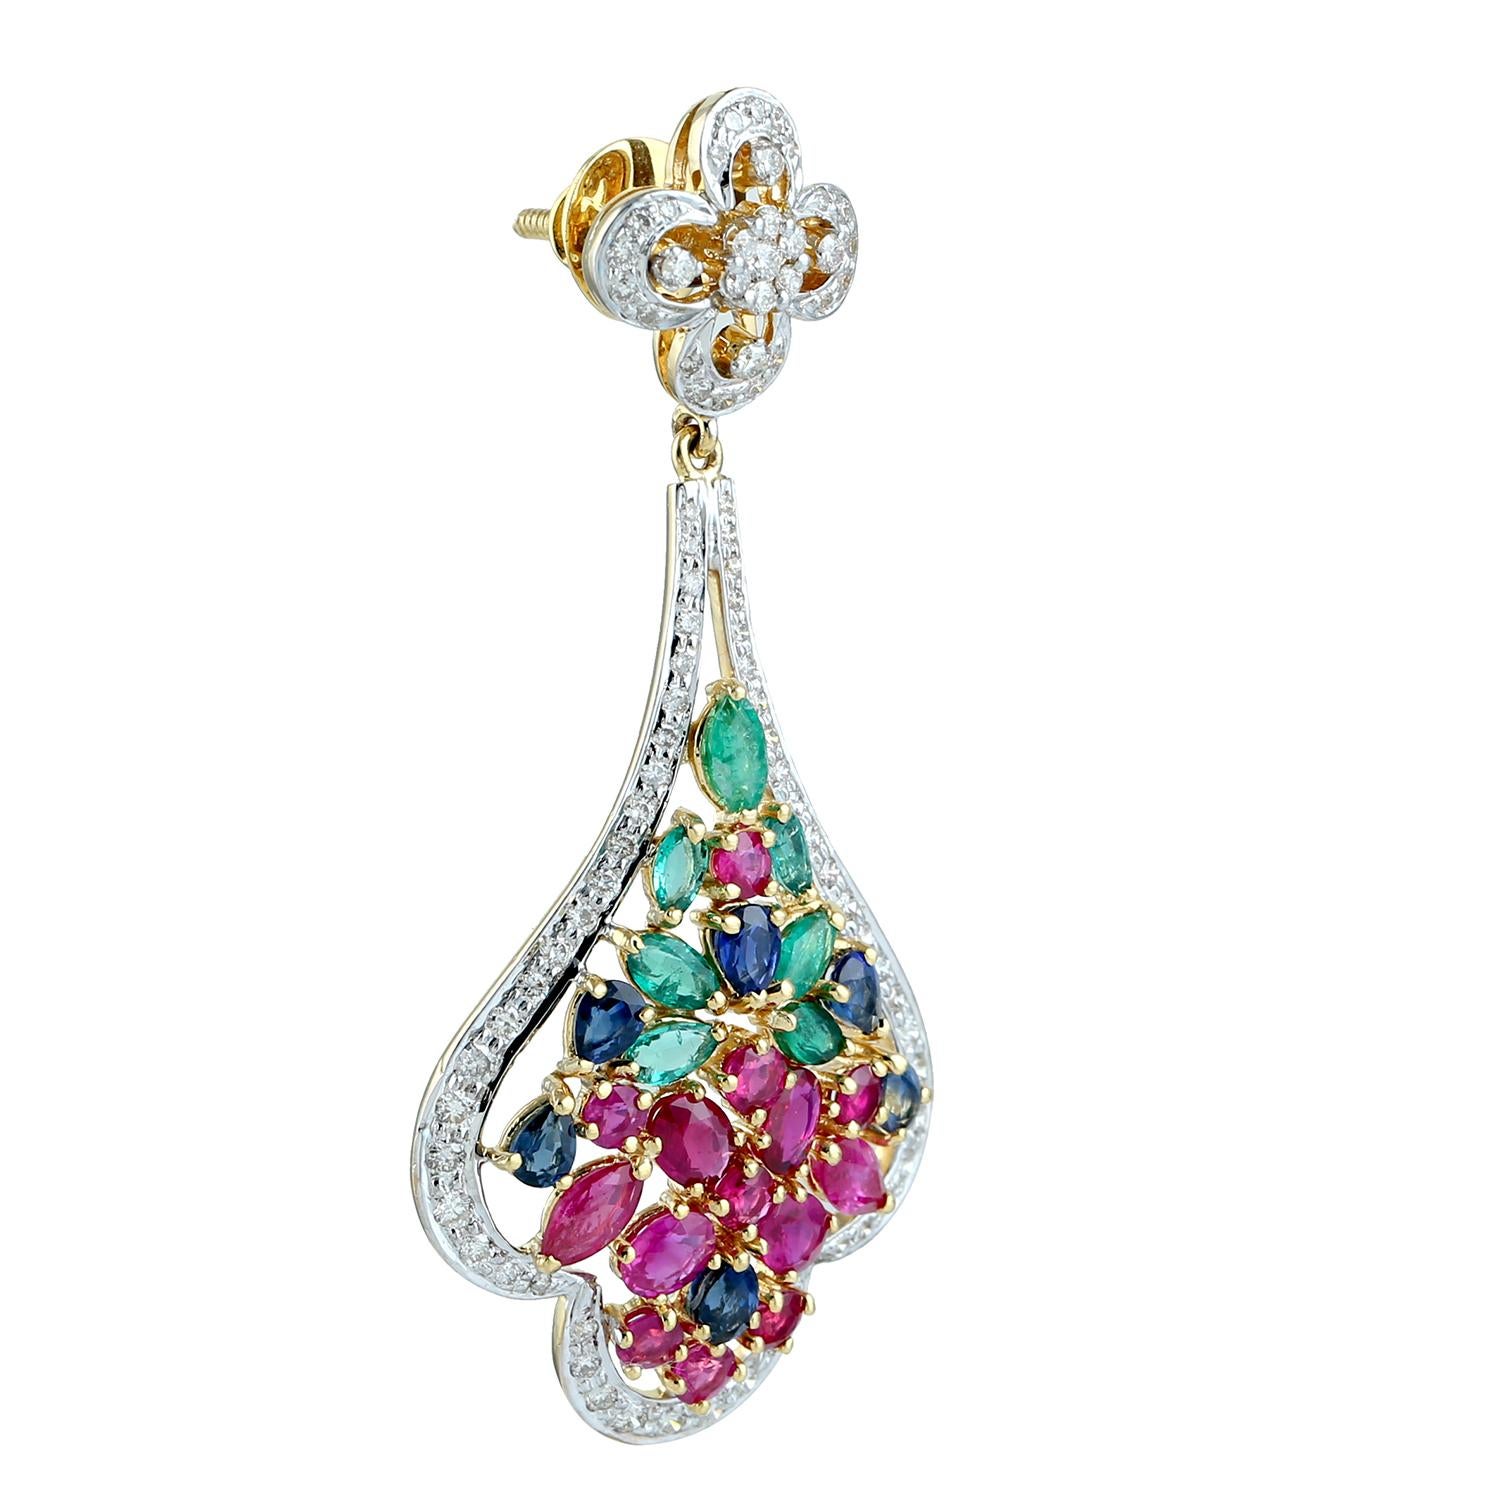 Cast from 18-karat gold.  These beautiful earrings are hand set with 1.35 carats emerald, 4.58 carats ruby, 1.62 carats blue sapphire and 2.11 carats of sparkling diamonds.

FOLLOW  MEGHNA JEWELS storefront to view the latest collection & exclusive